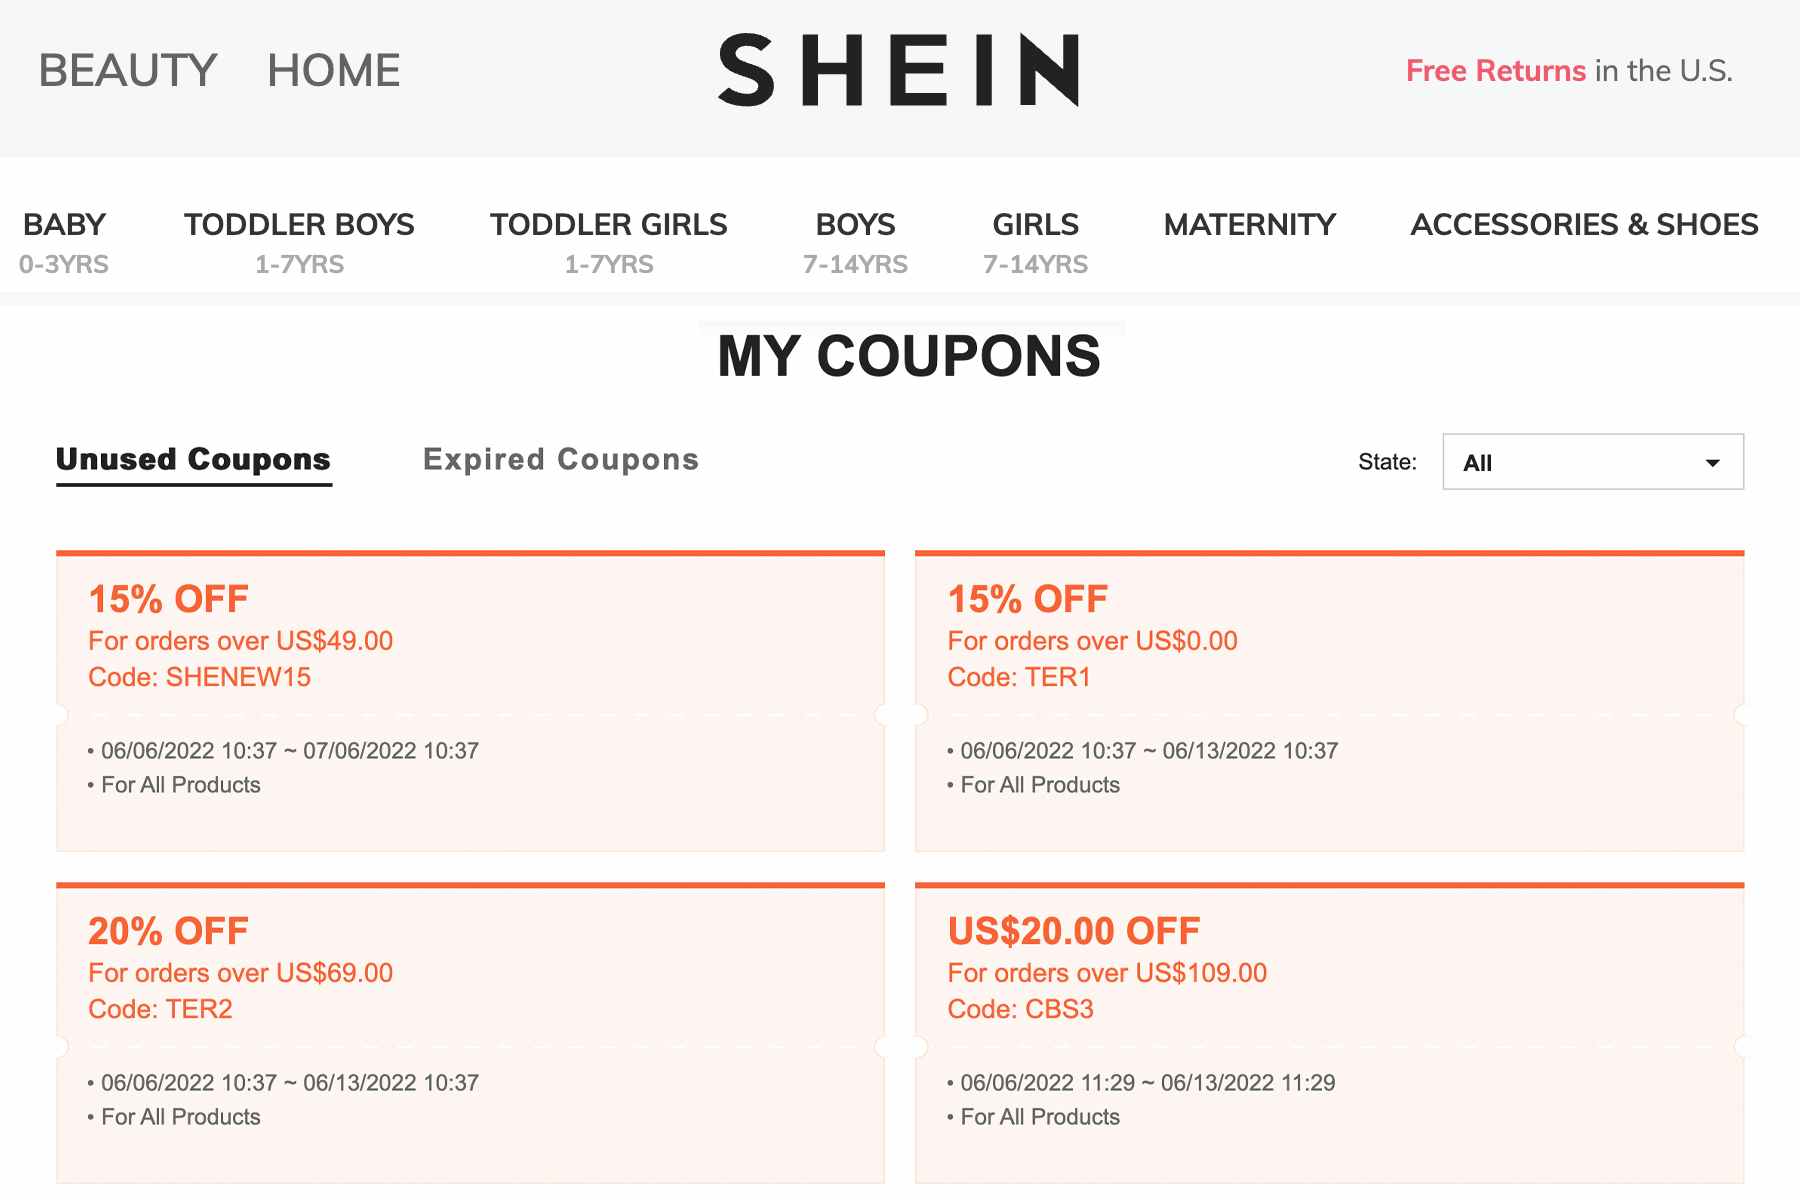 15% Off SHEIN Coupon Code & Promo Code - January 2024